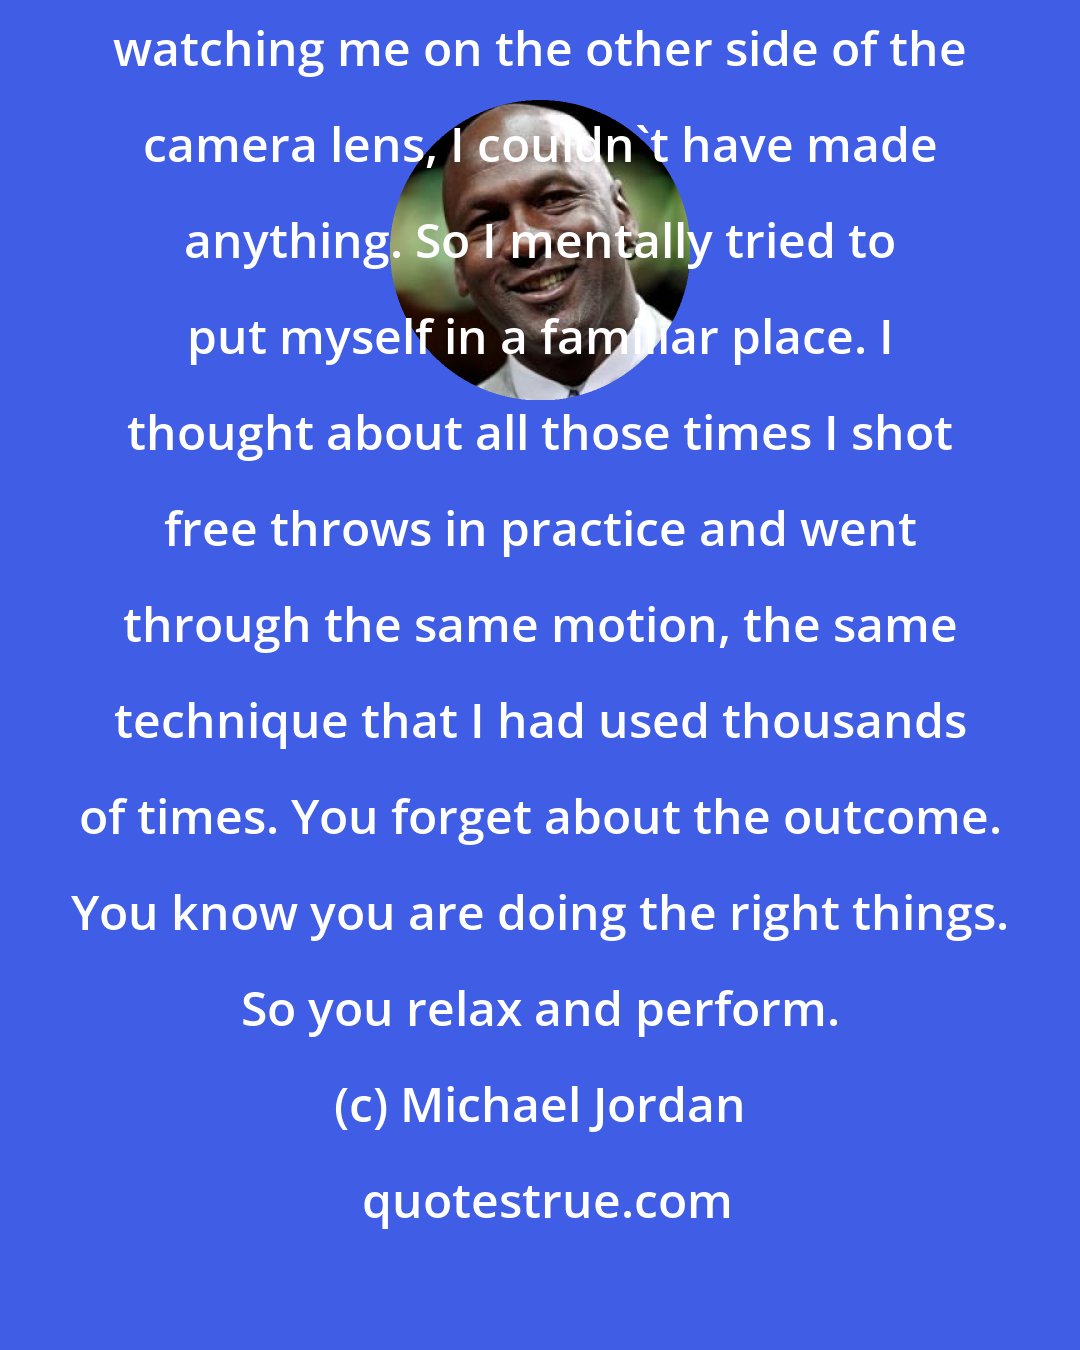 Michael Jordan: If I had stood at the free-throw line and thought about 10 million people watching me on the other side of the camera lens, I couldn't have made anything. So I mentally tried to put myself in a familiar place. I thought about all those times I shot free throws in practice and went through the same motion, the same technique that I had used thousands of times. You forget about the outcome. You know you are doing the right things. So you relax and perform.